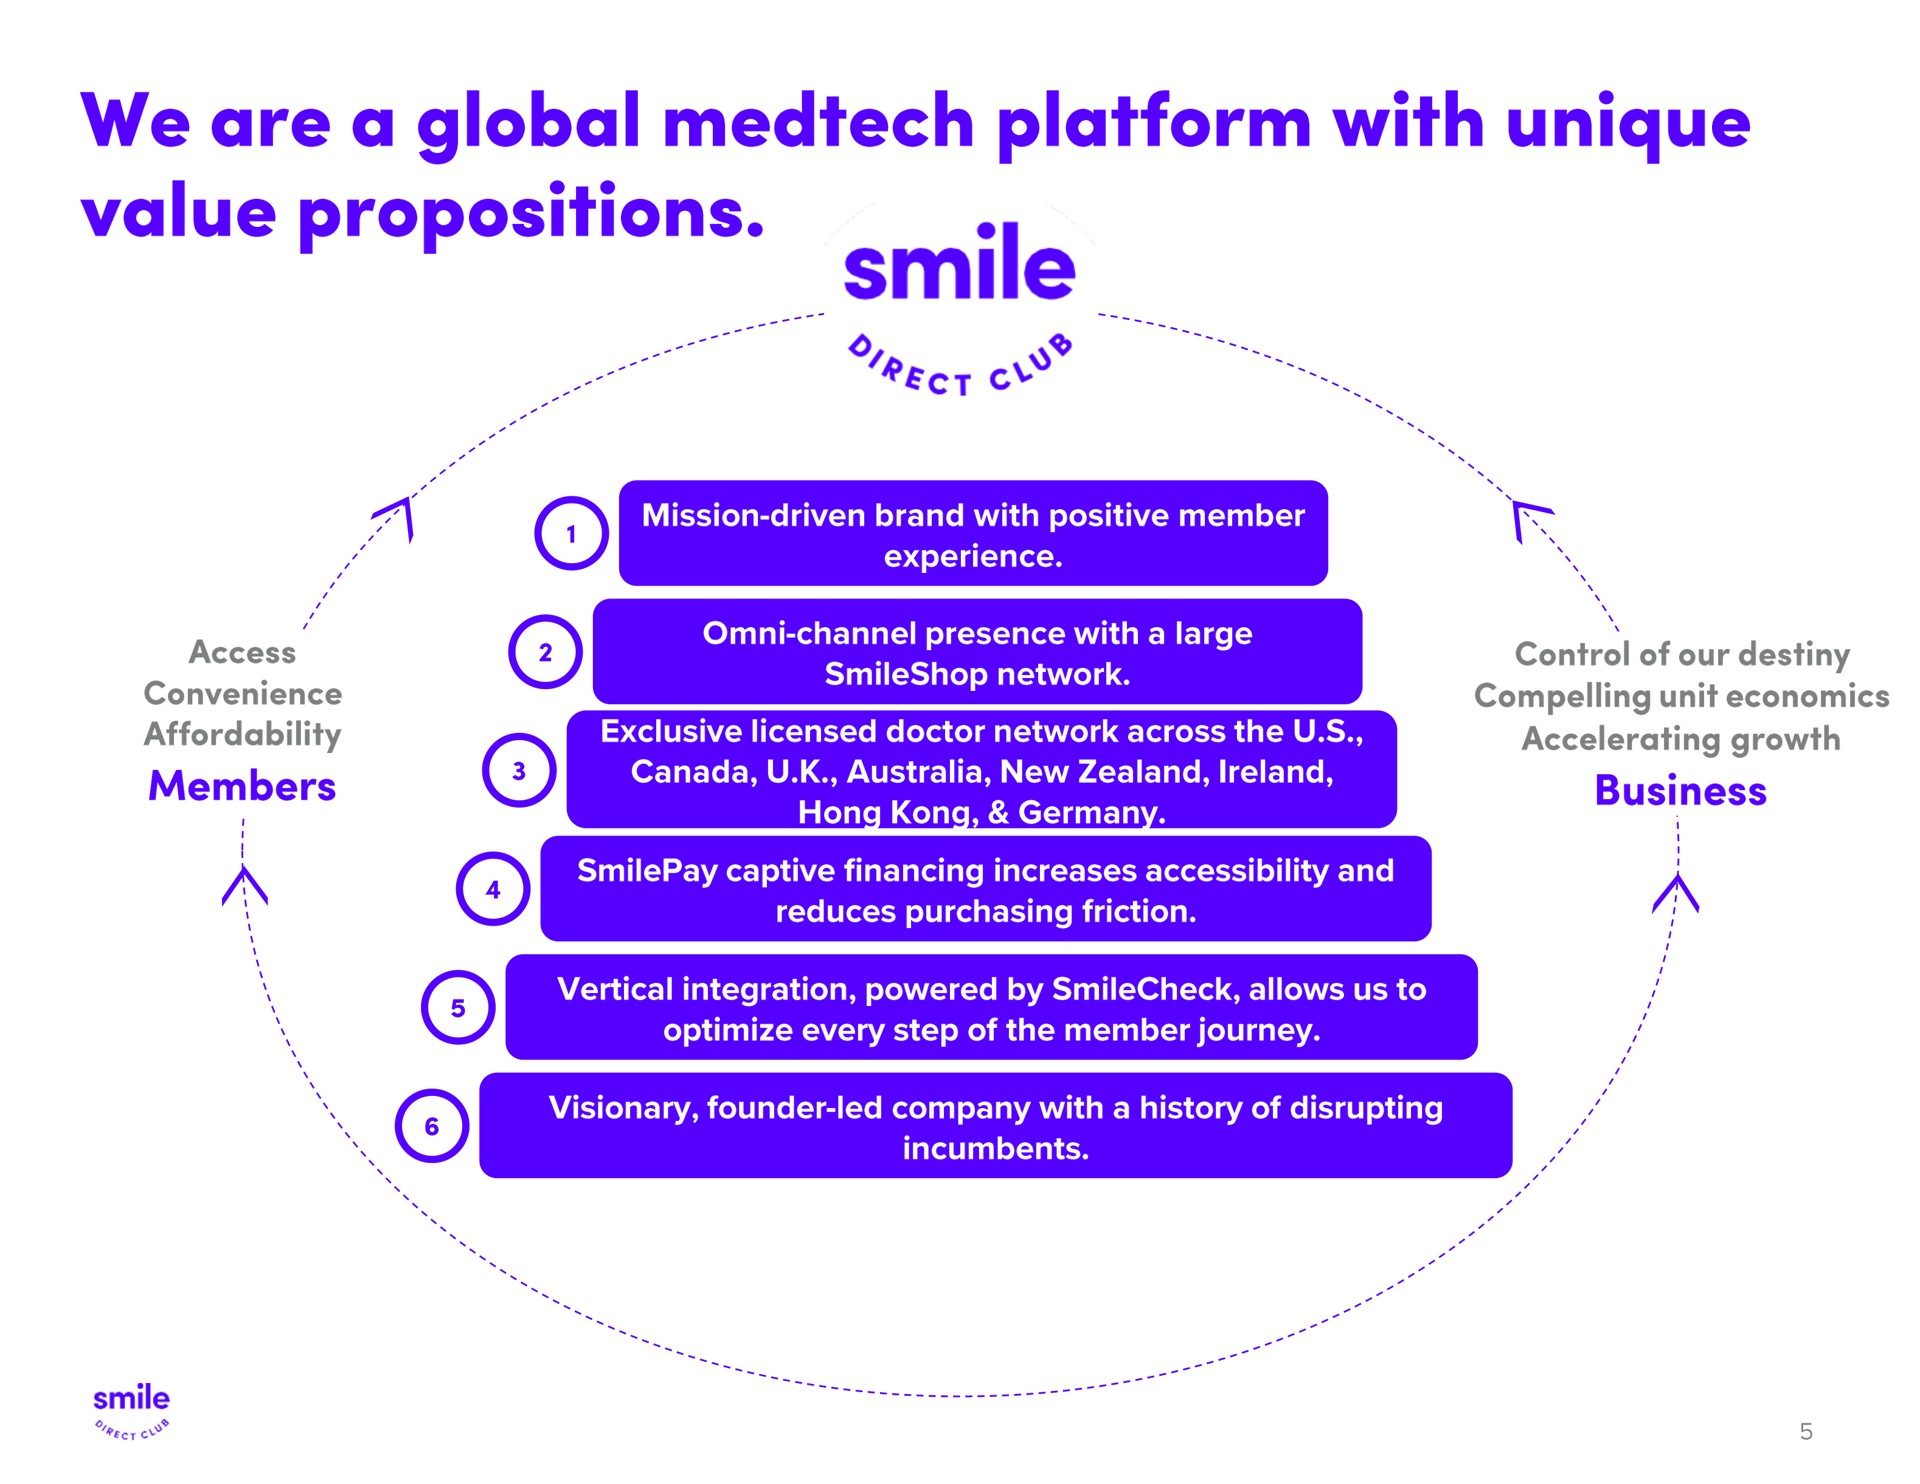 we are a global platform with unique value propositions | SmileDirectClub